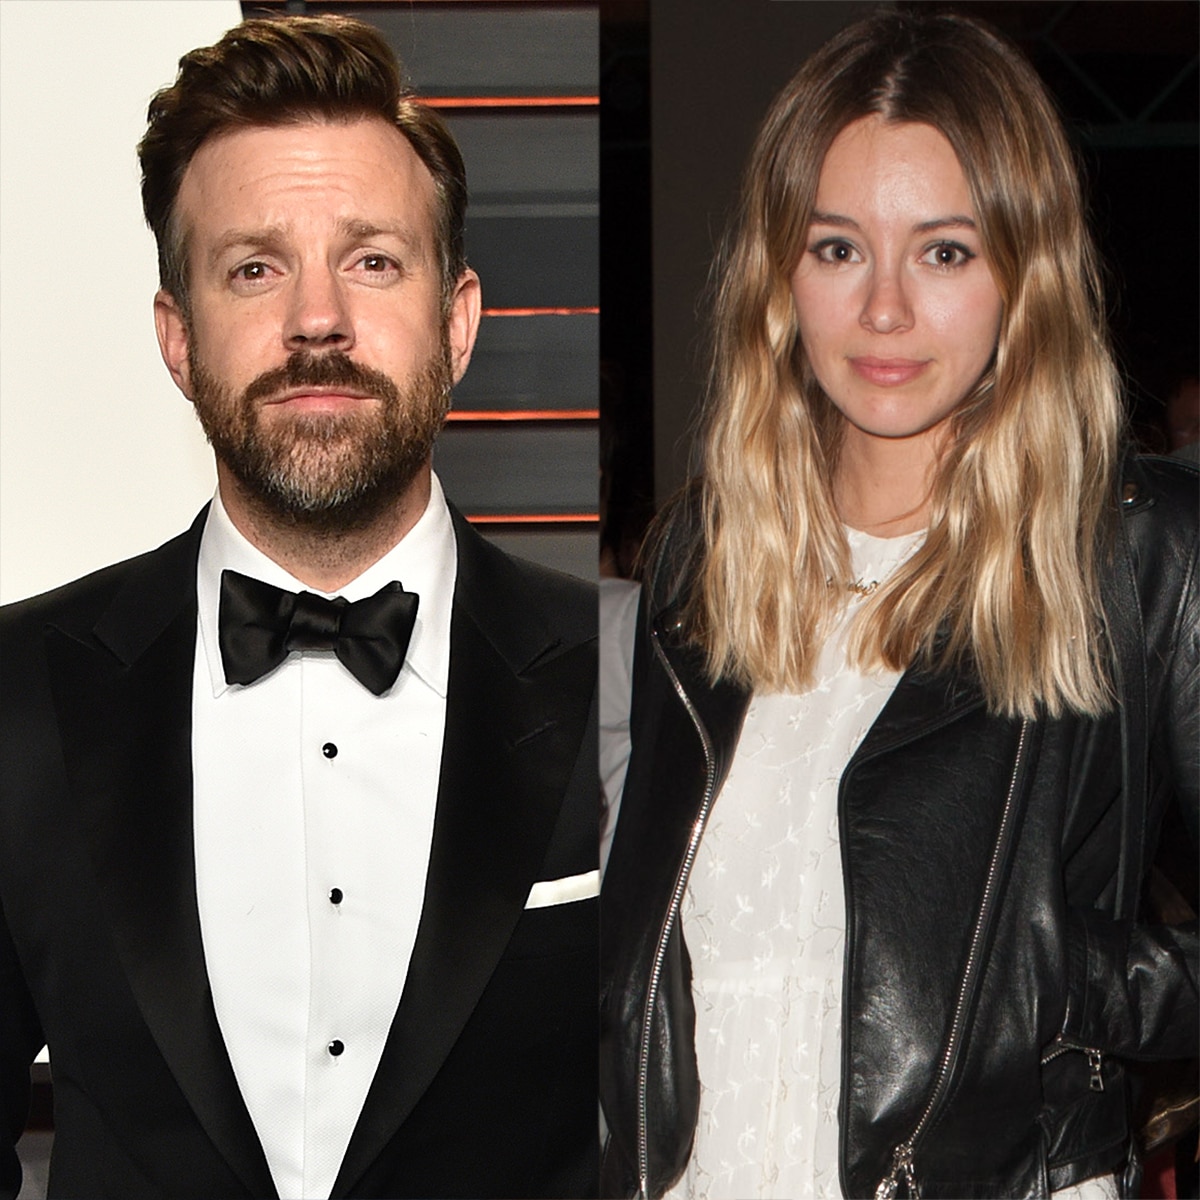 Jason Sudeikis Subtly Confirmed His Romance With Keeley Hazell - E! Online 